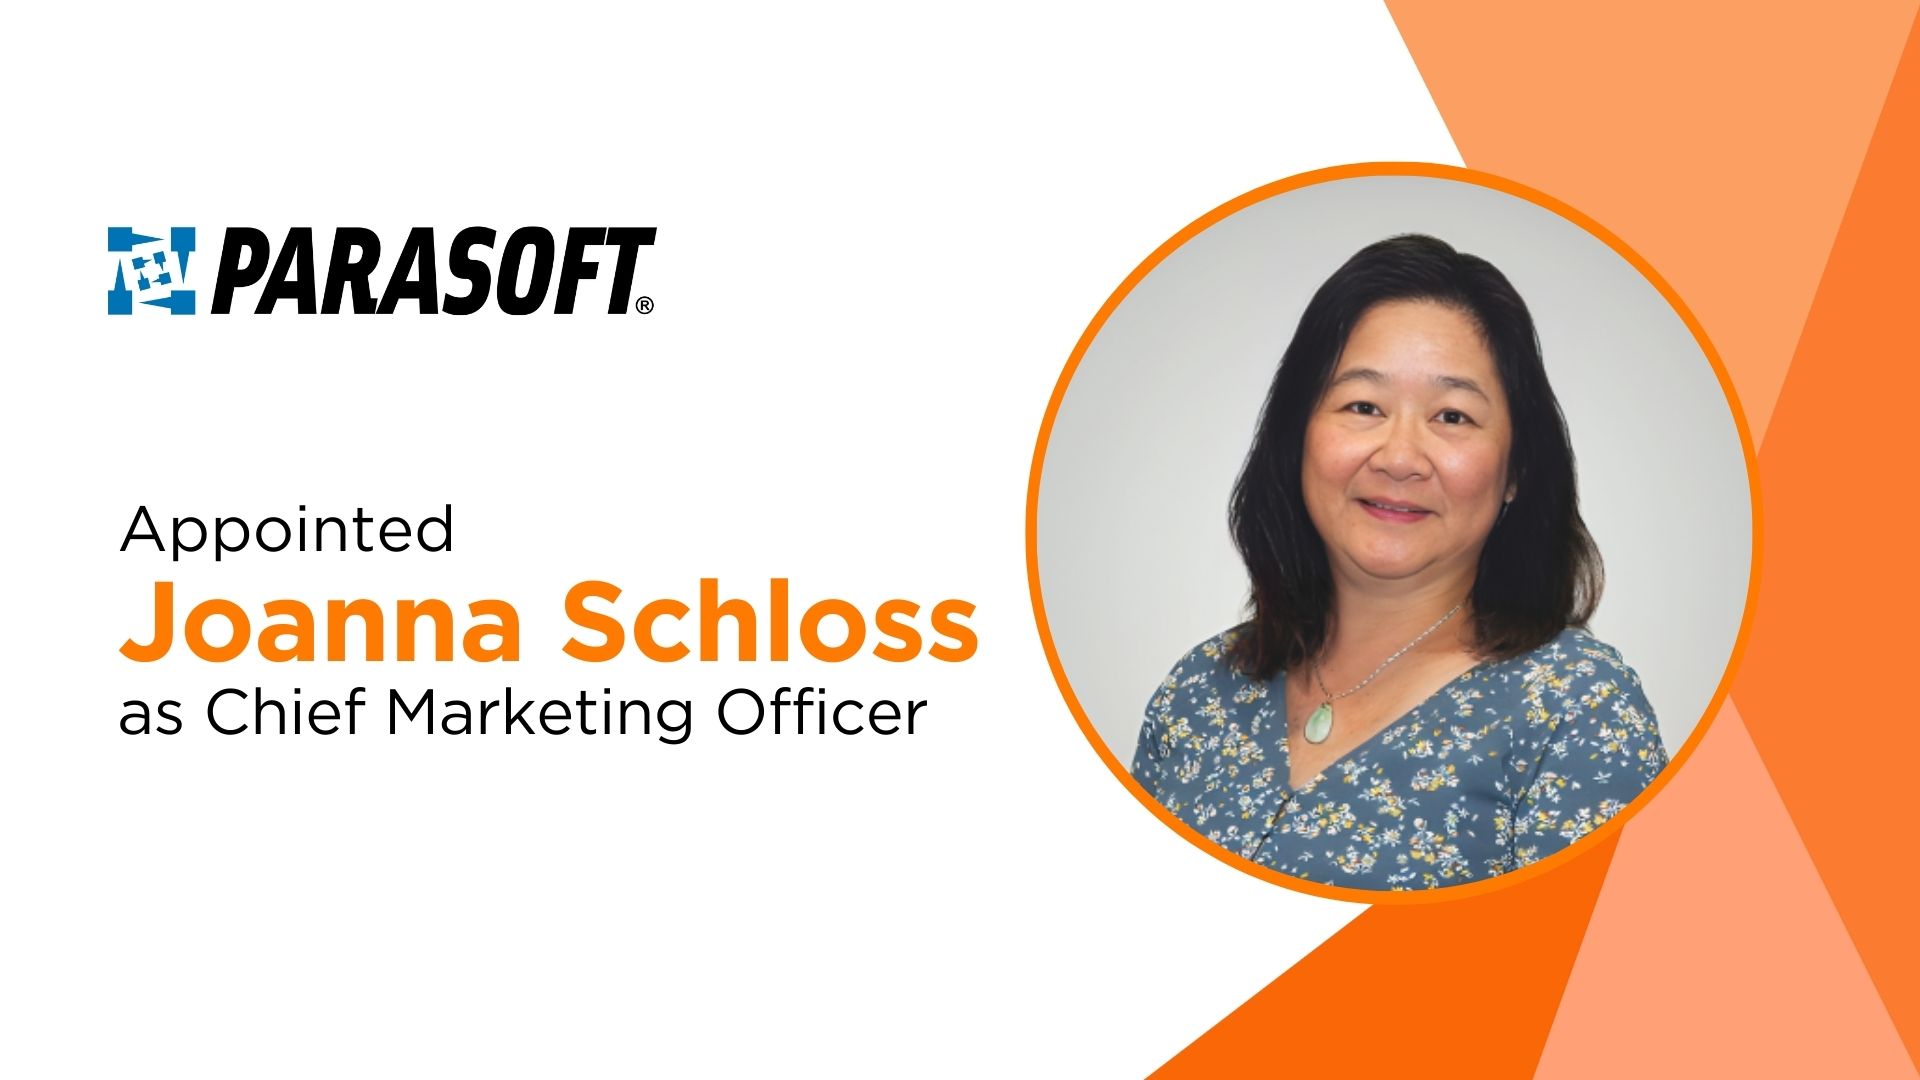 Parasoft Appoints Joanna Schloss as New CMO to Drive Growth